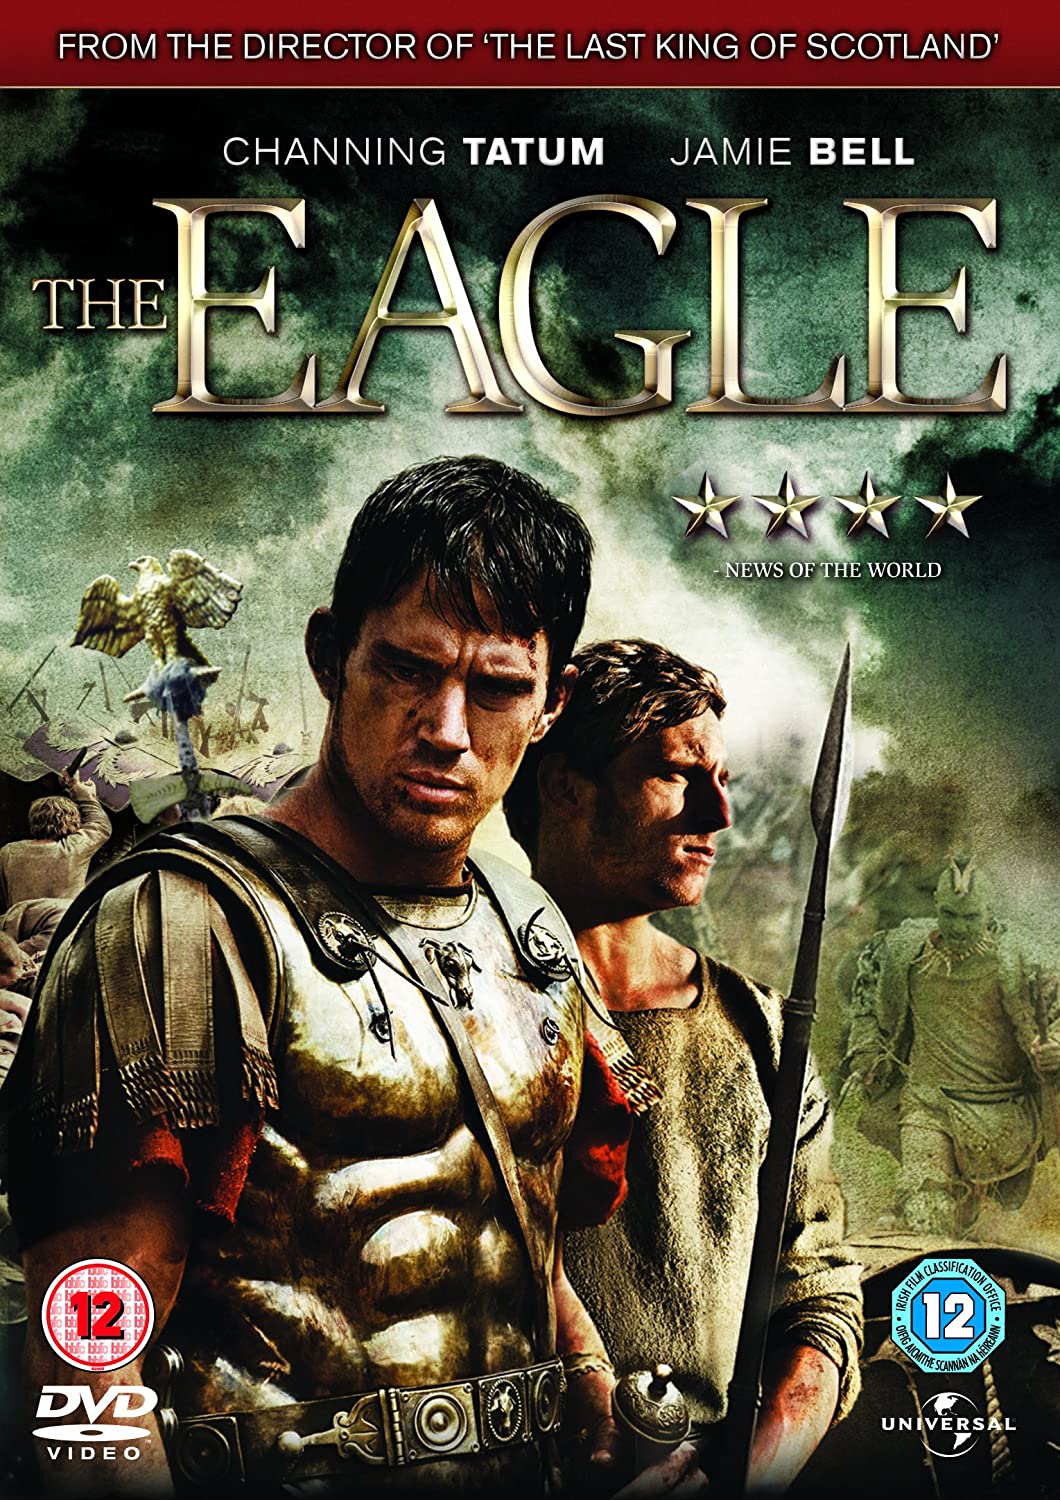 The Eagle - Action [2011] [DVD]